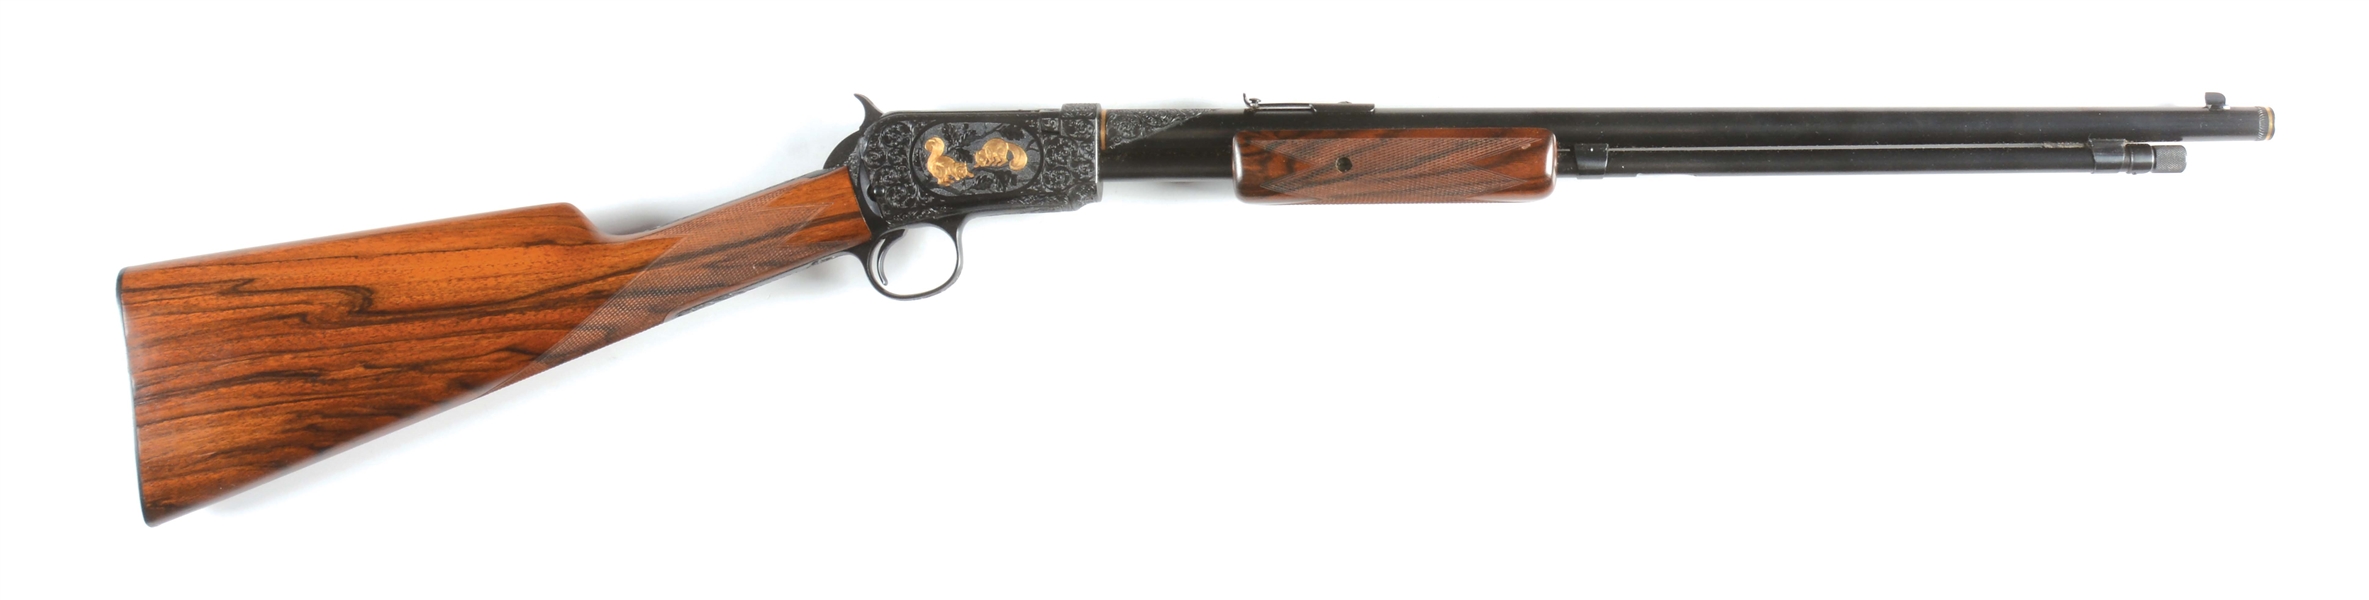 (C) WINCHESTER 06 SLIDE ACTION RIFLE.(1935)